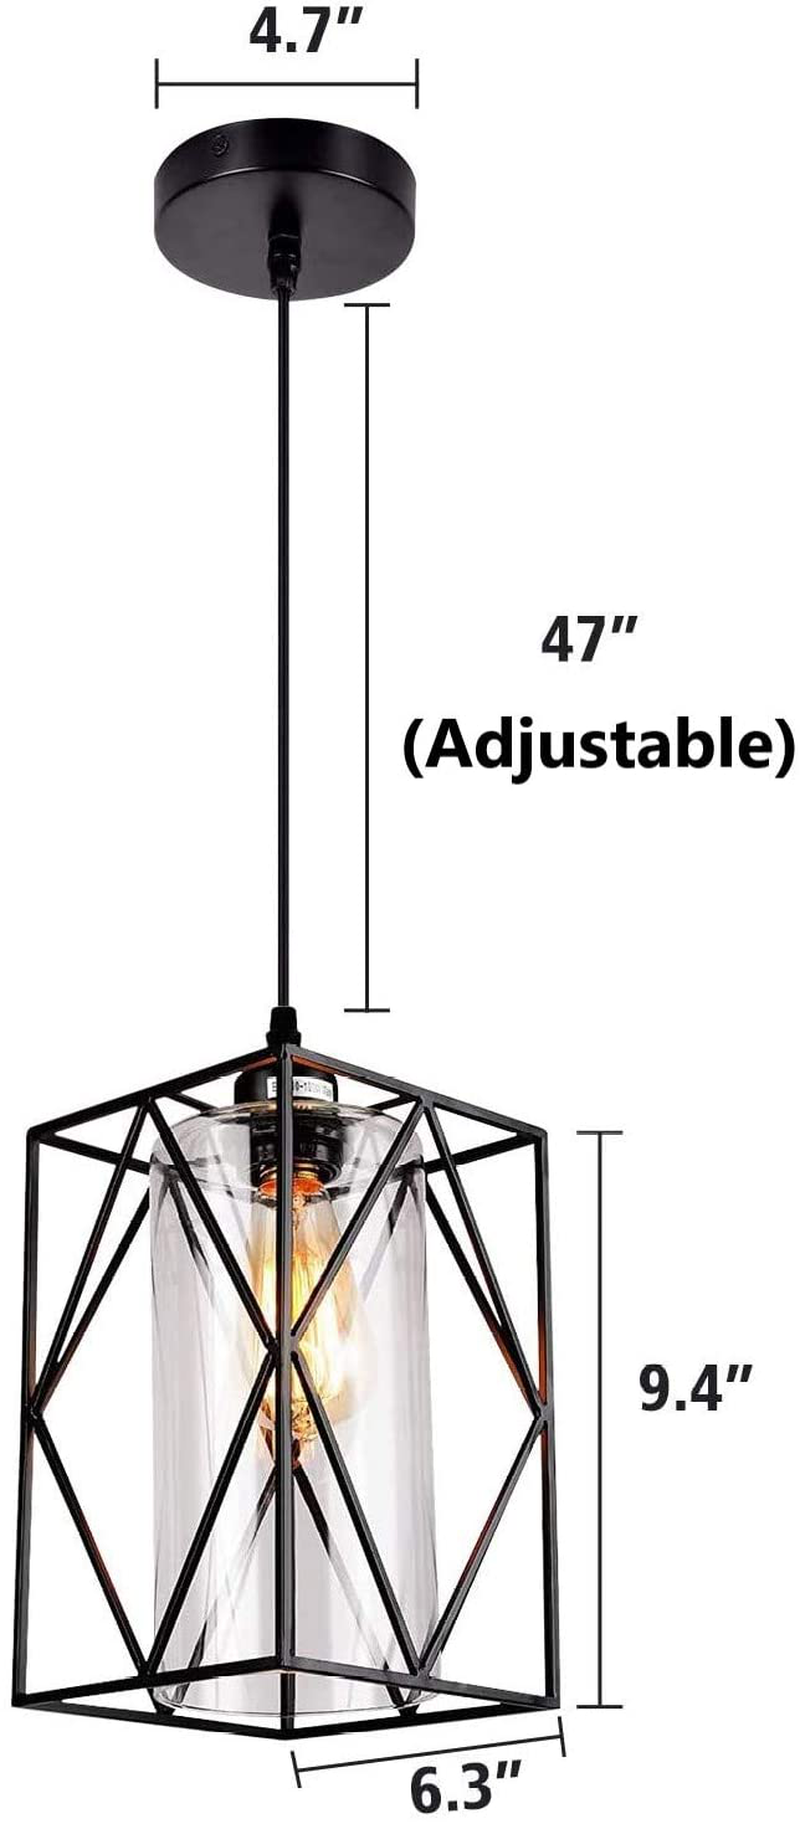 HMVPL Pendant Lighting Fixture, Set of 2 Black Farmhouse Hanging Chandelier Lights with Glass Shade, Mini Industrial Ceiling Lamp for Kitchen Island Dining Room Over Sink Hallway Bedroom Home & Garden > Lighting > Lighting Fixtures HMVPL   